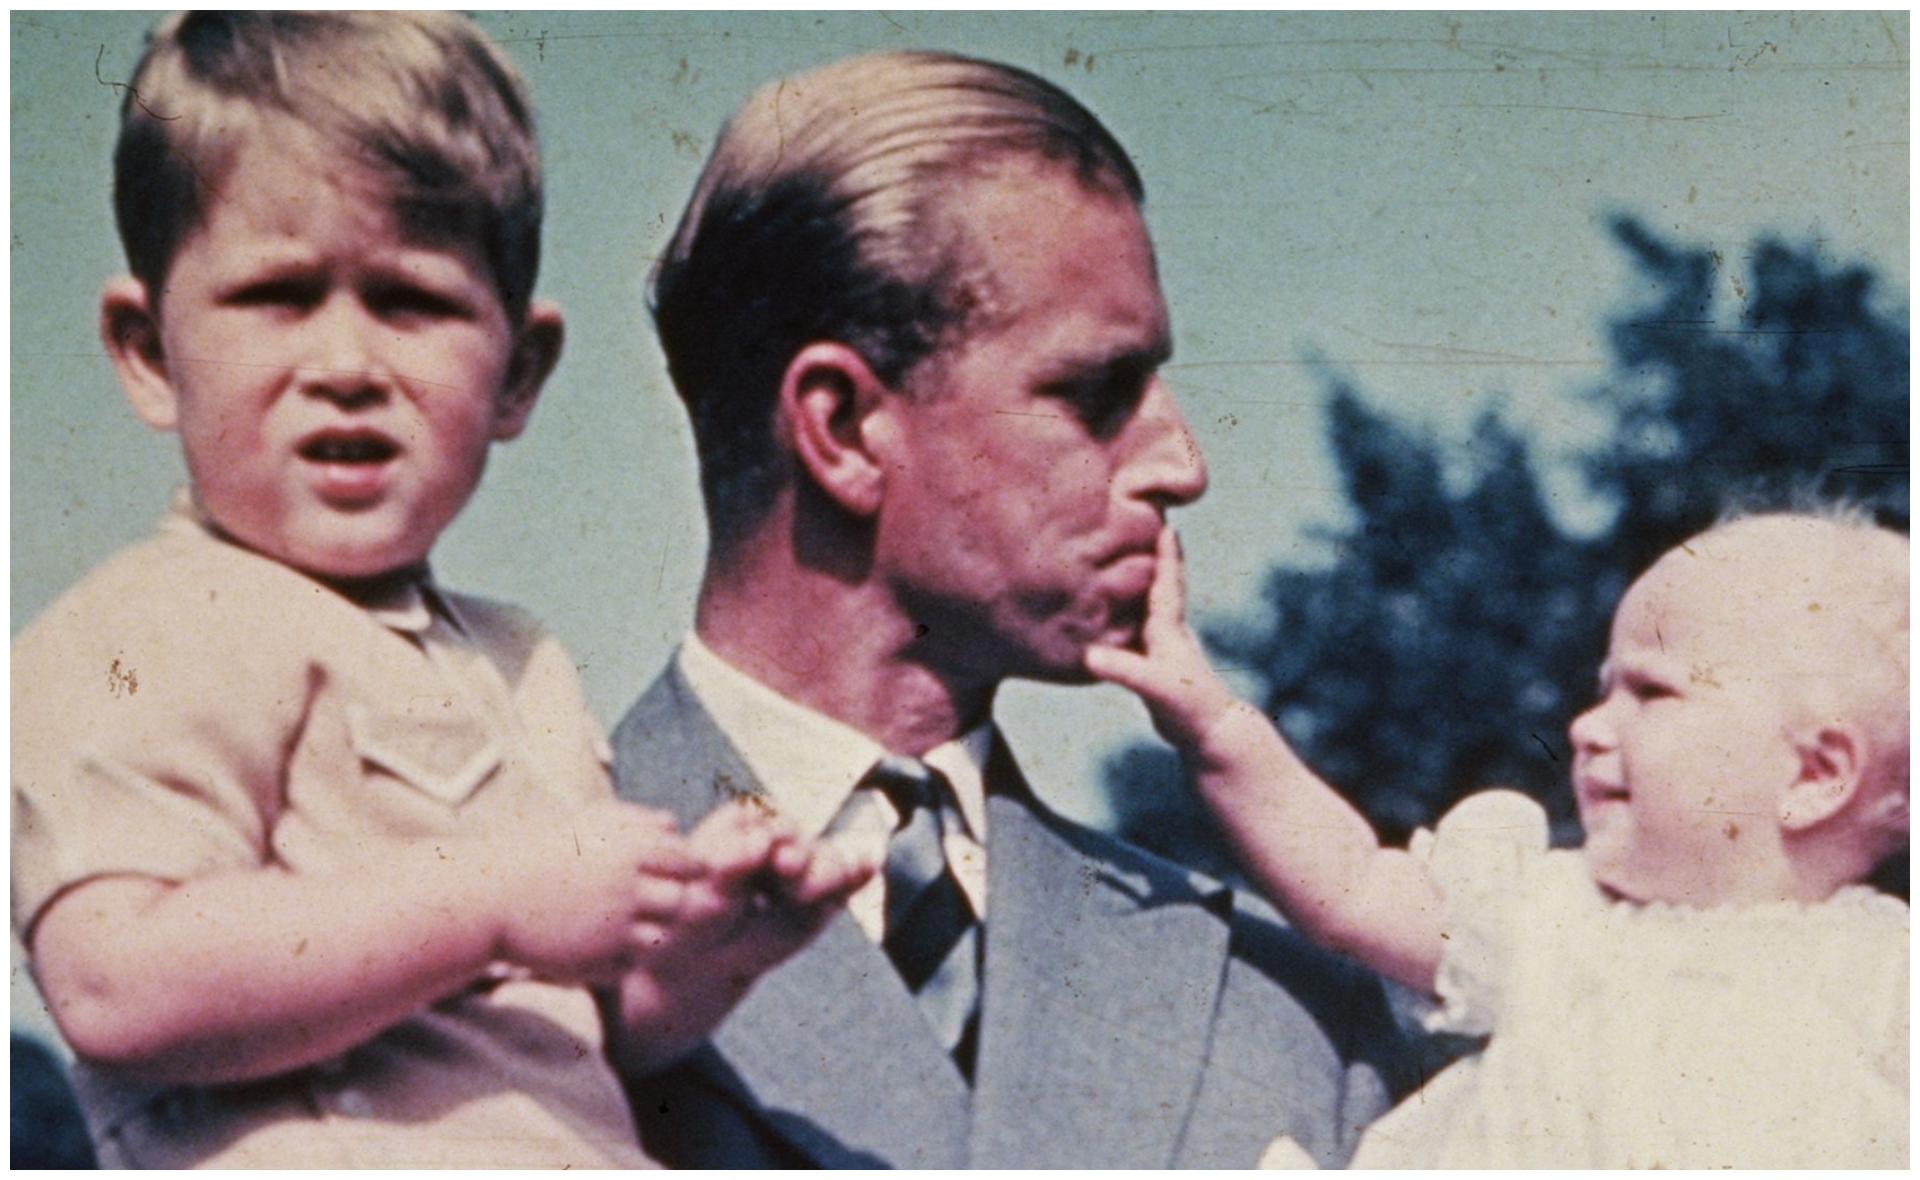 He was one of the most famous royals in the world, but Prince Philip’s most important role was being a dad